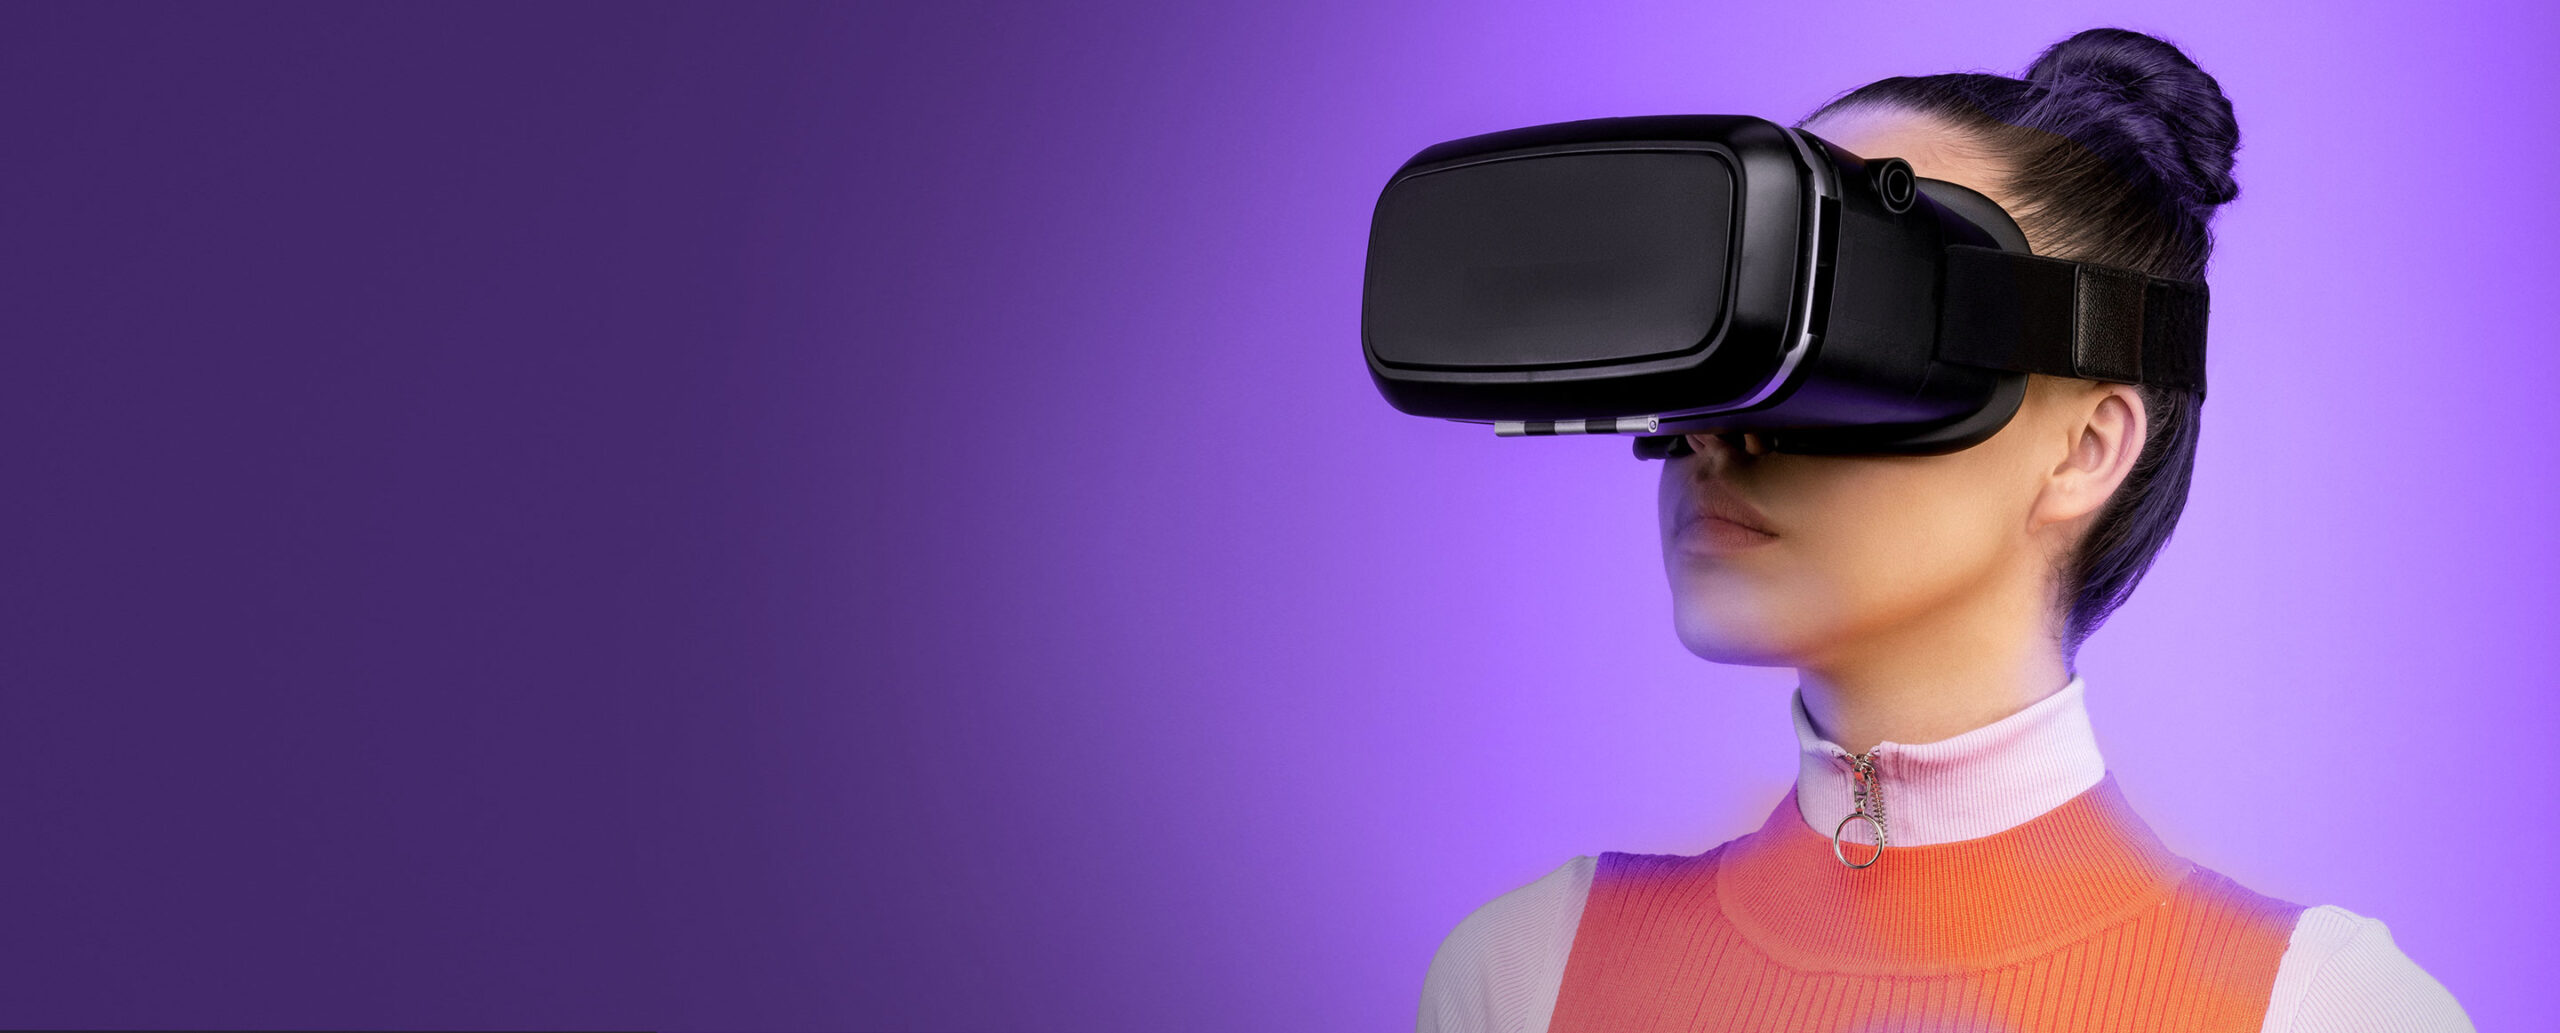 Image of a woman wearing virtual reality goggles and orange dress with a purple background